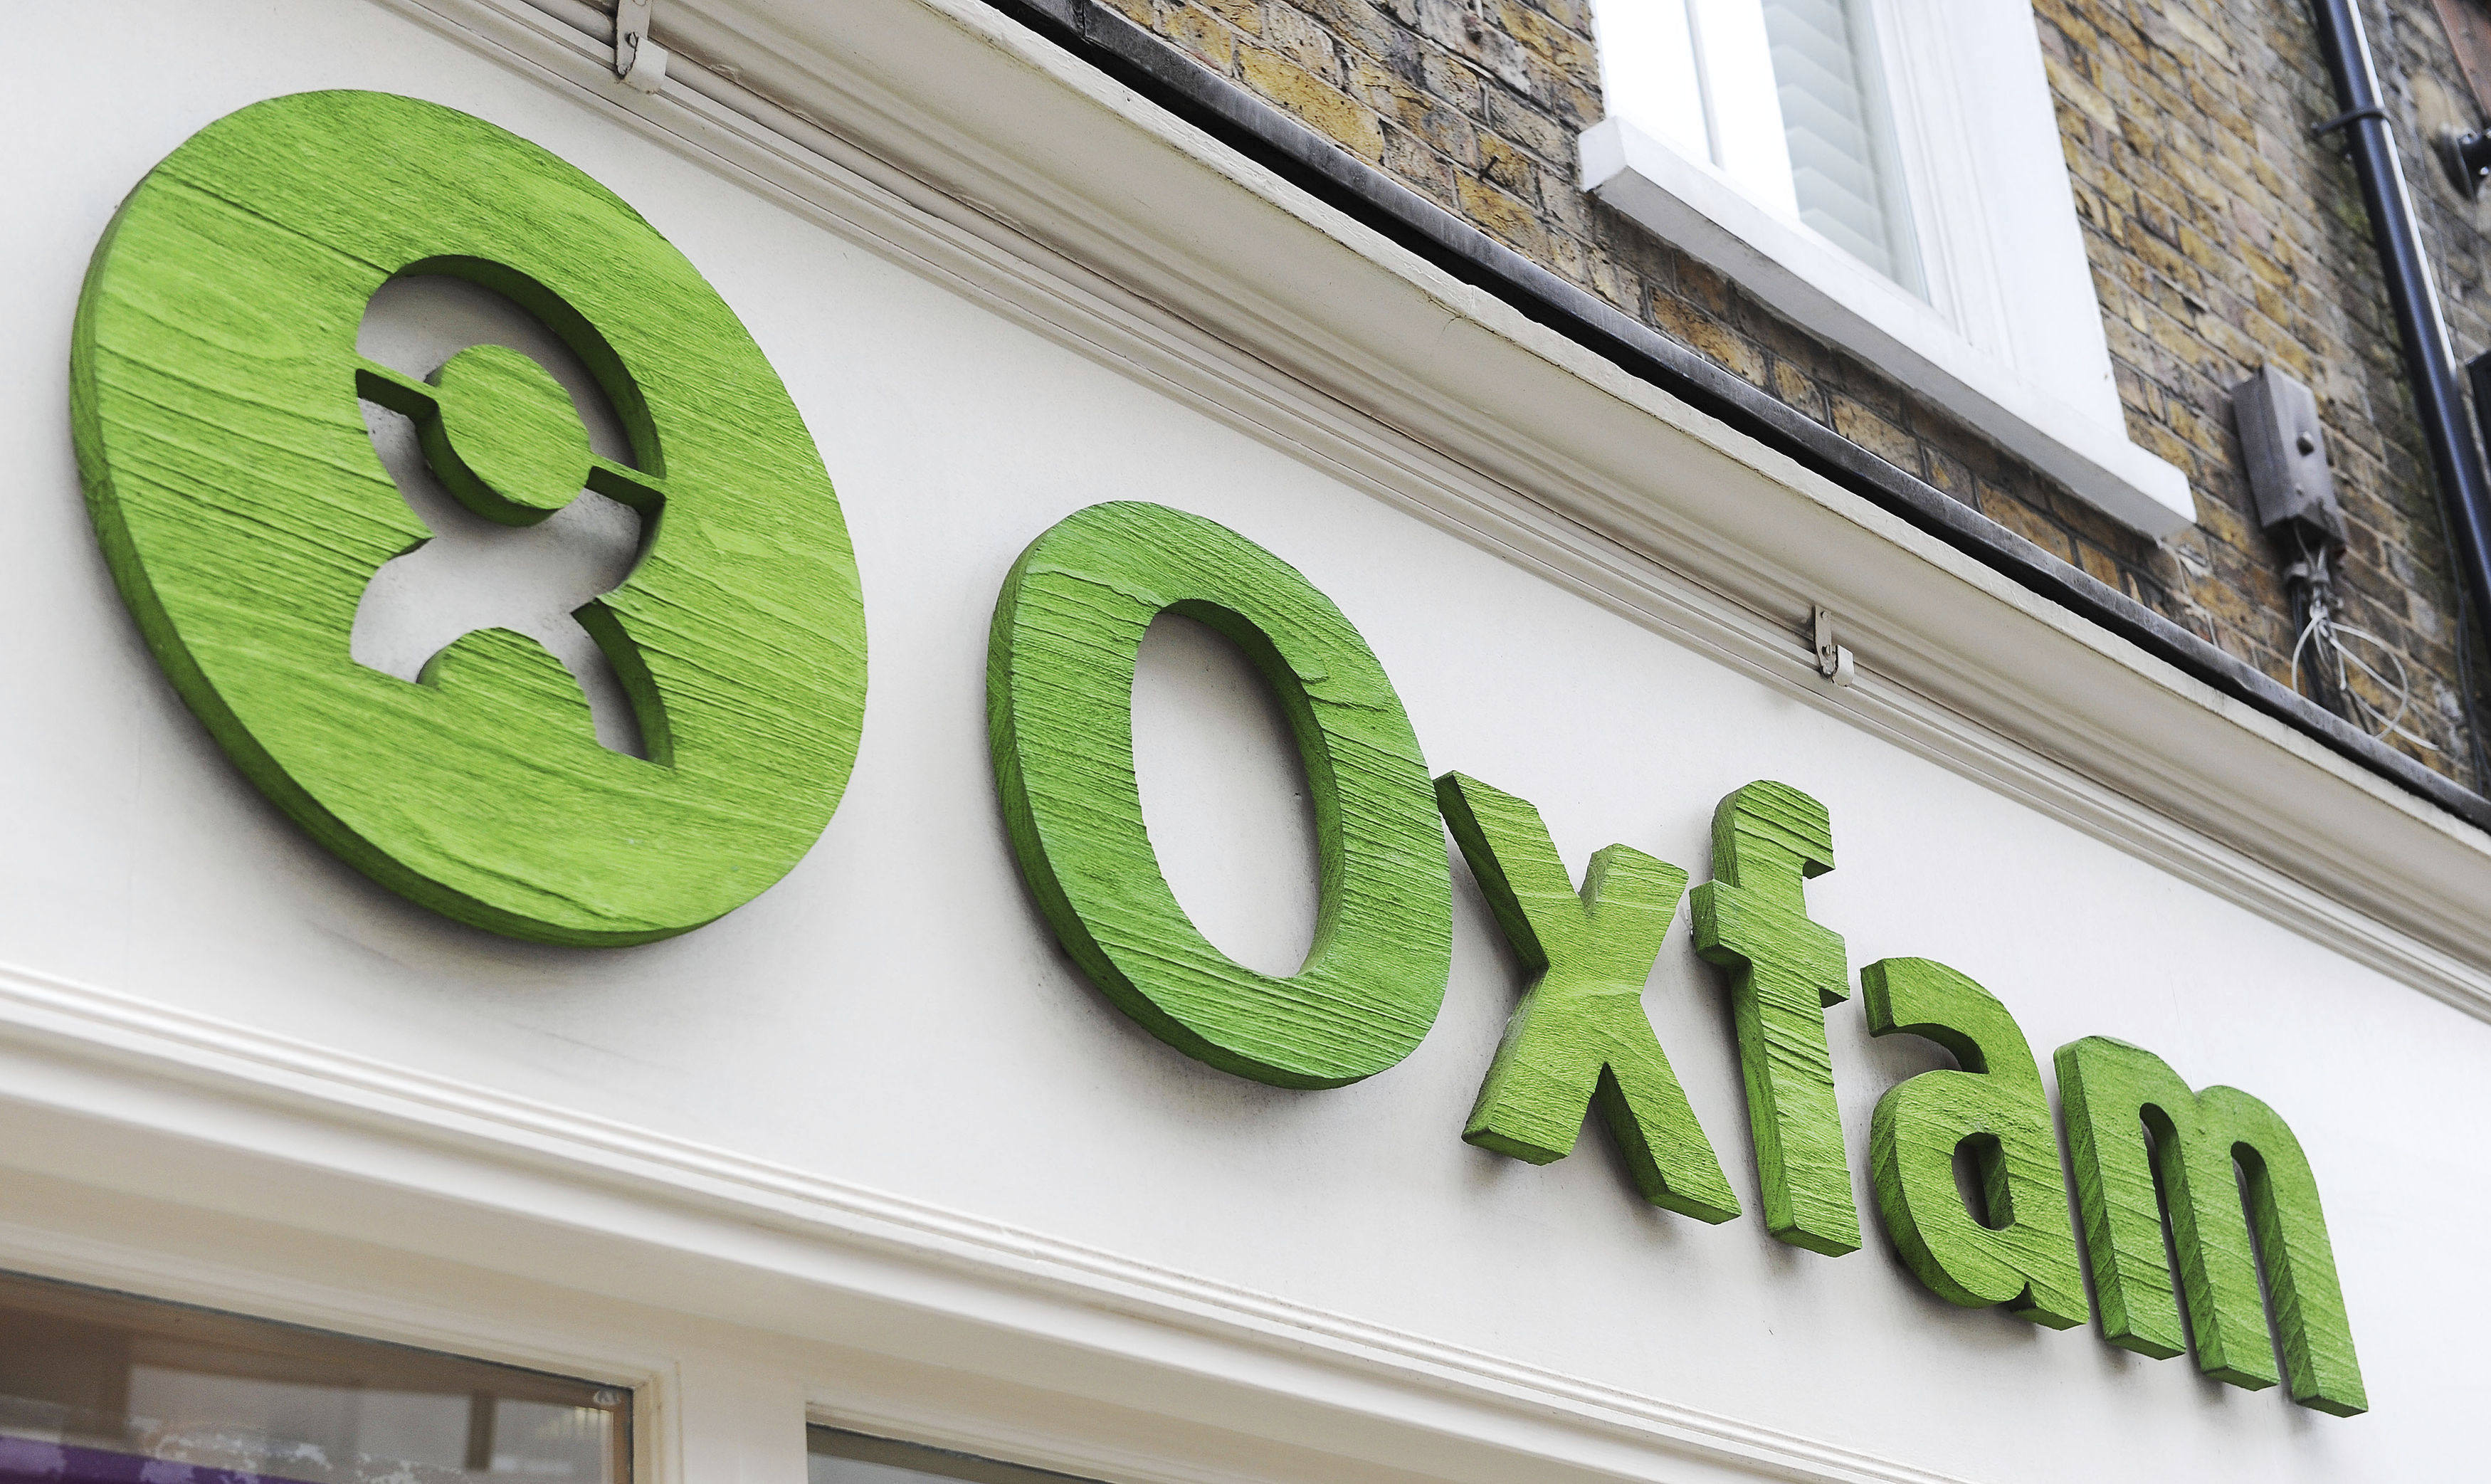 Oxfam Hong Kong has urged the public to stay vigilant regarding any unsolicited or suspicious communications, including phone calls, text messages and emails. Photo: AP